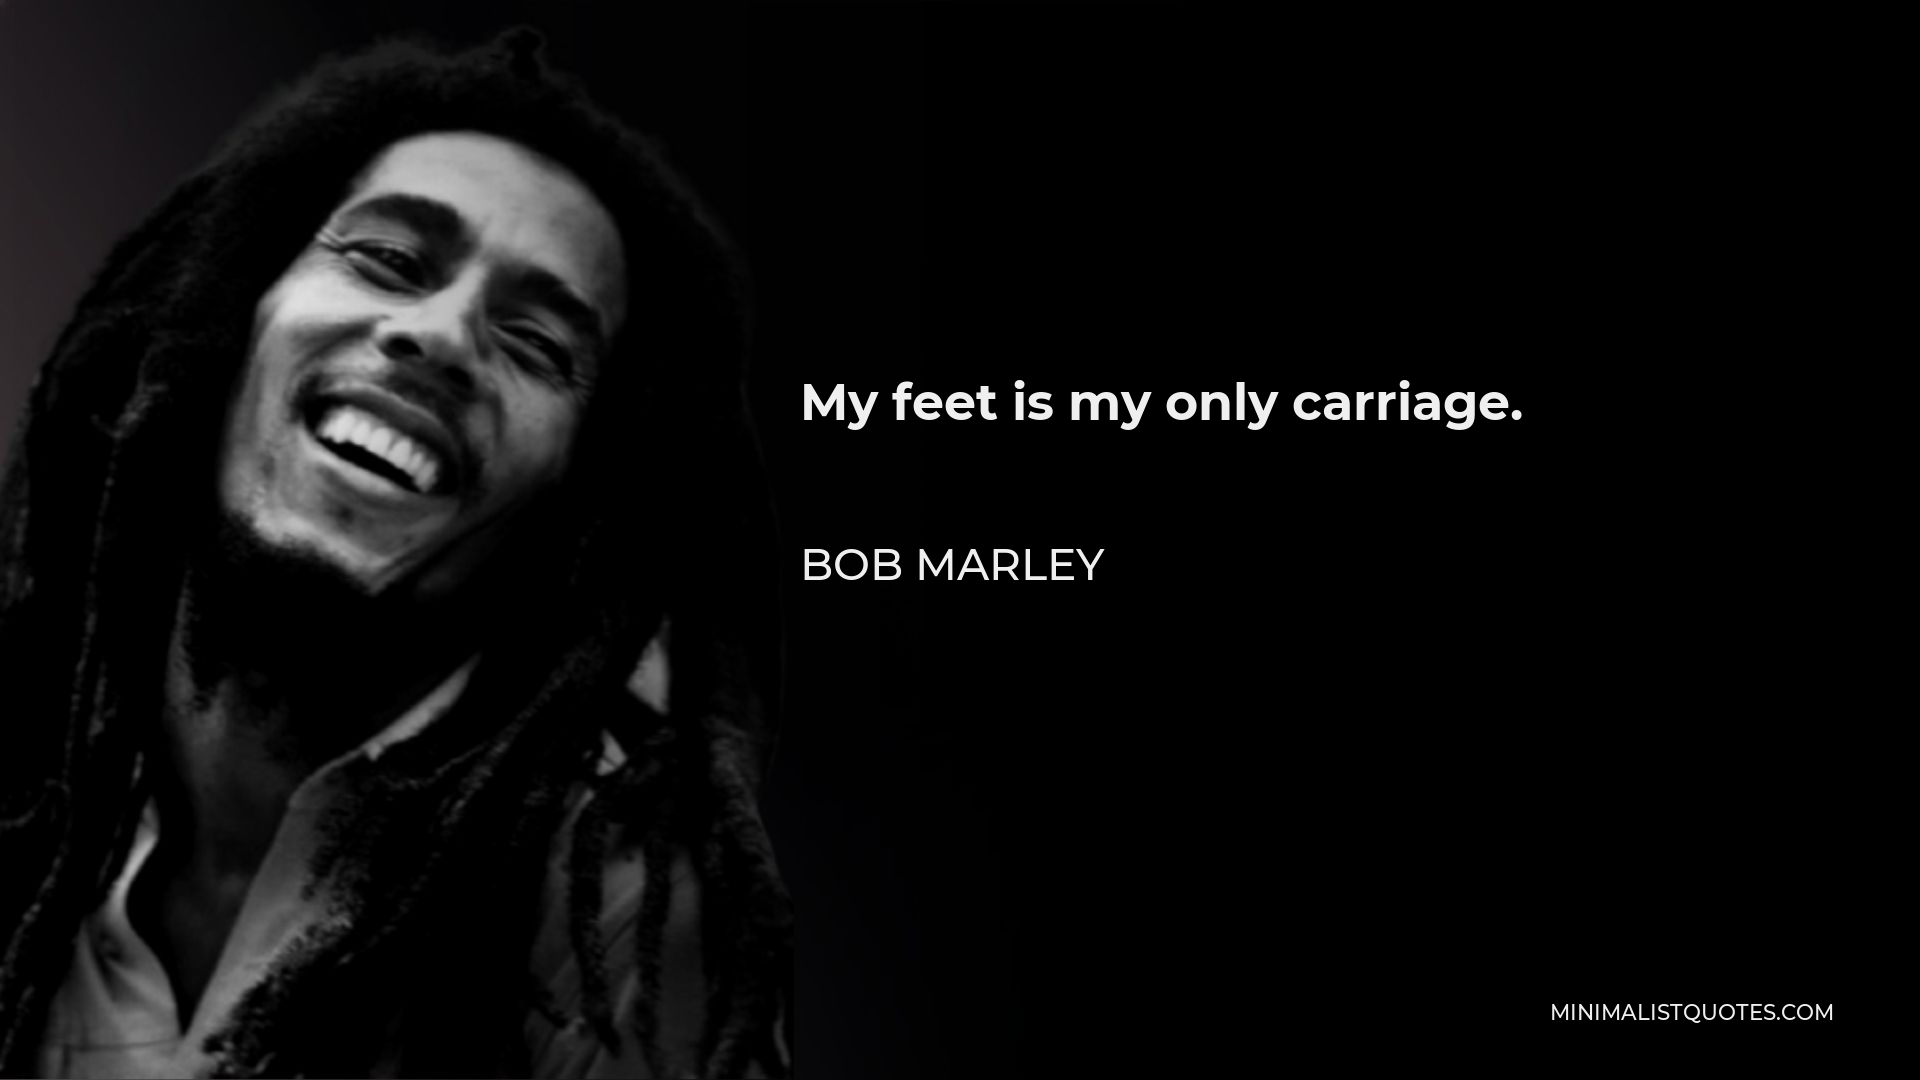 Bob Marley Quote - My feet is my only carriage.